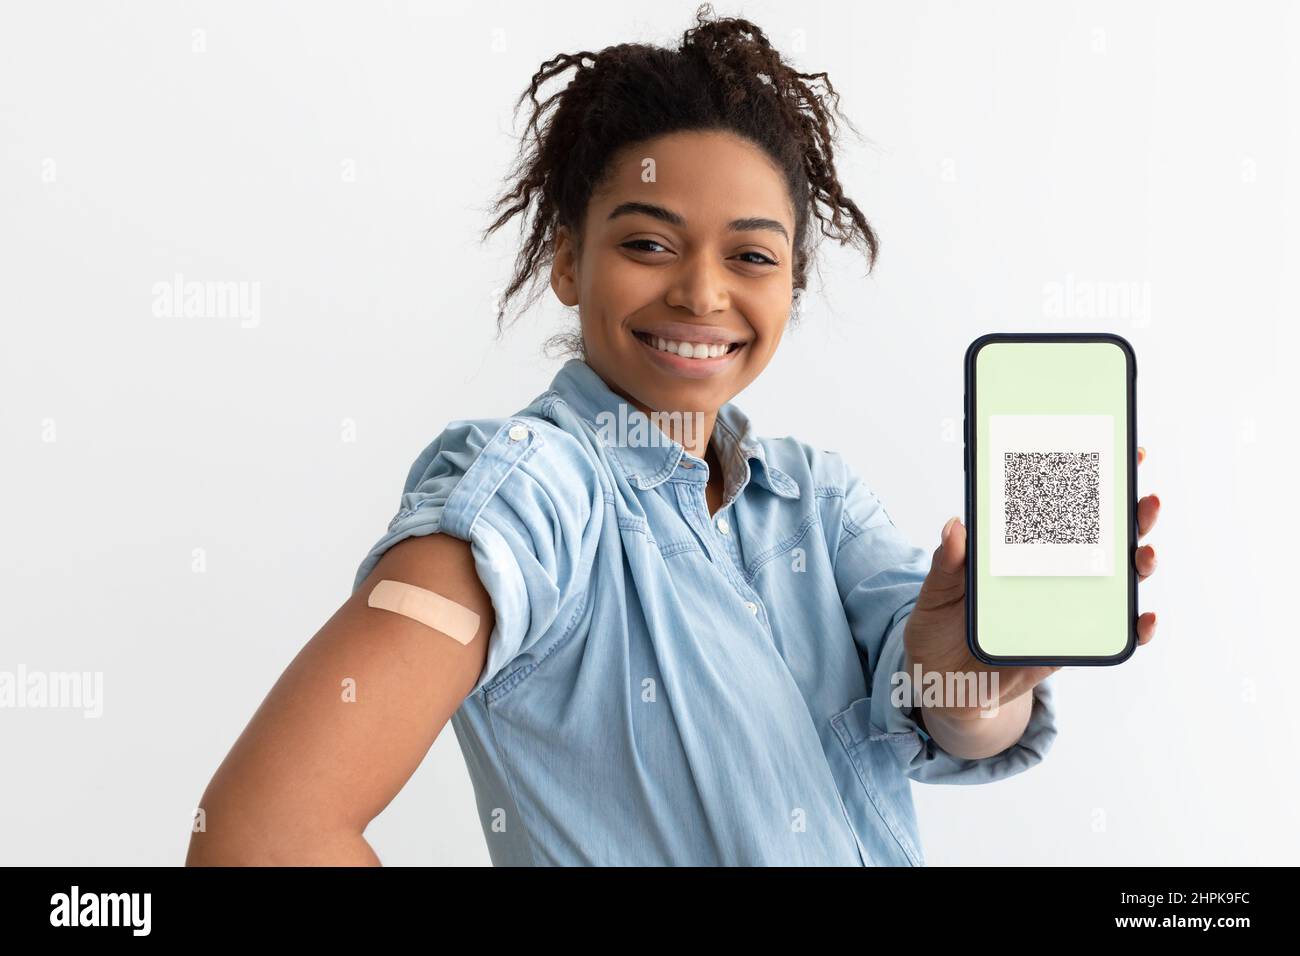 Black lady showing adhesive plaster on arm and digital certificate Stock Photo